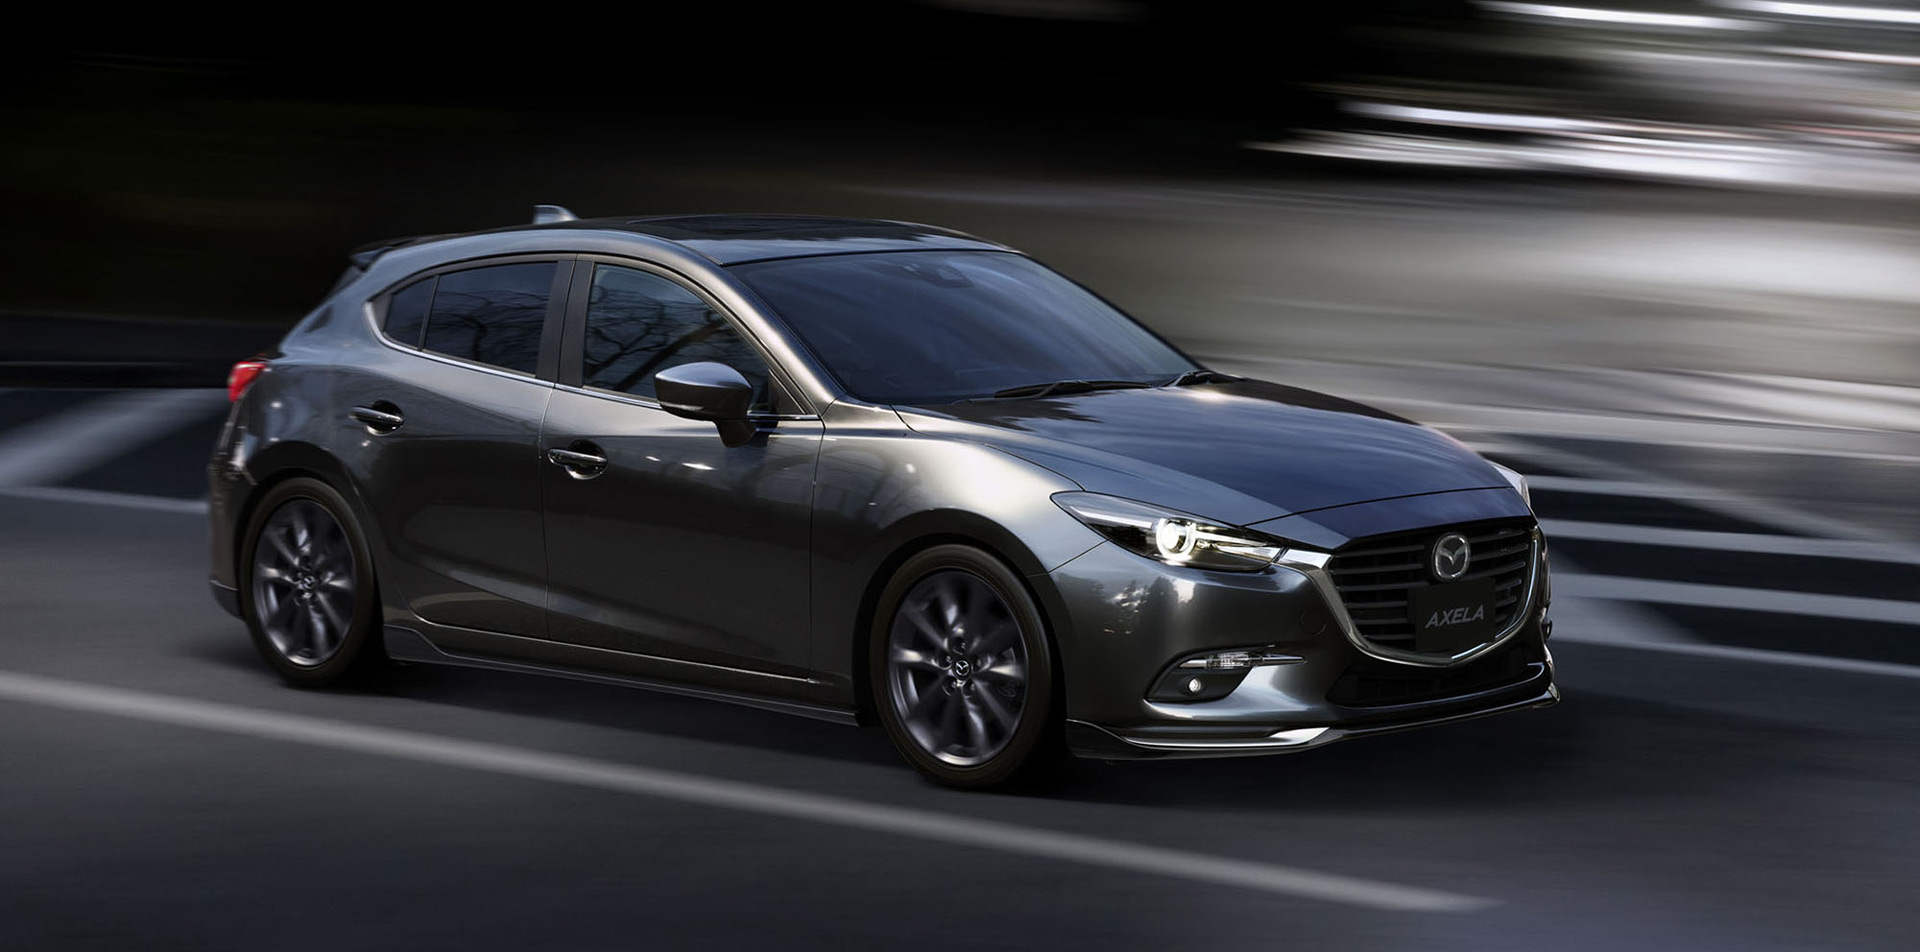 Nice Images Collection: Mazda 3 Desktop Wallpapers